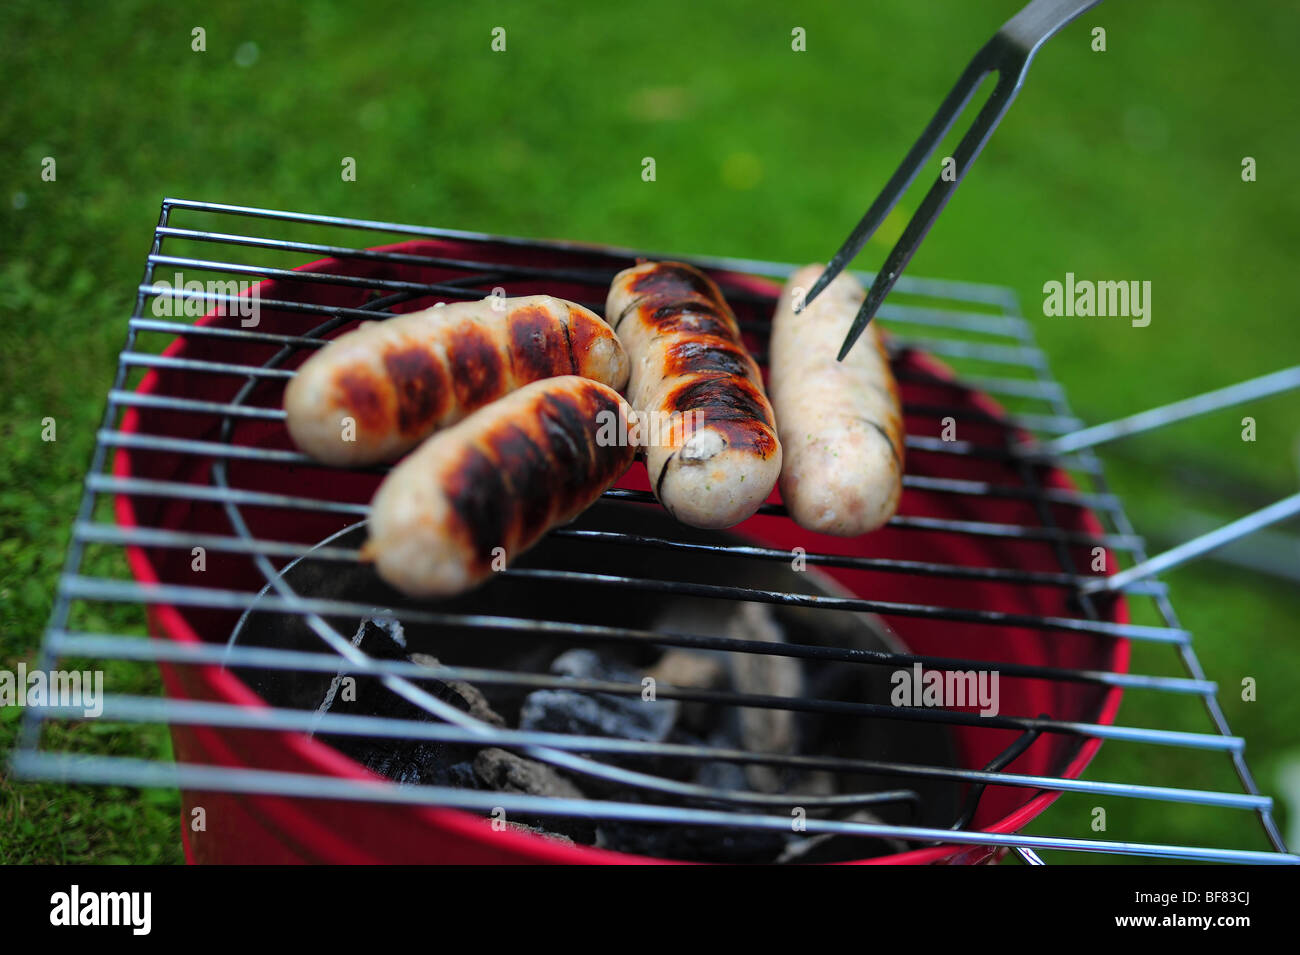 Sausages cooking on a barbeque BBQ in a garden in Devon, UK Stock Photo